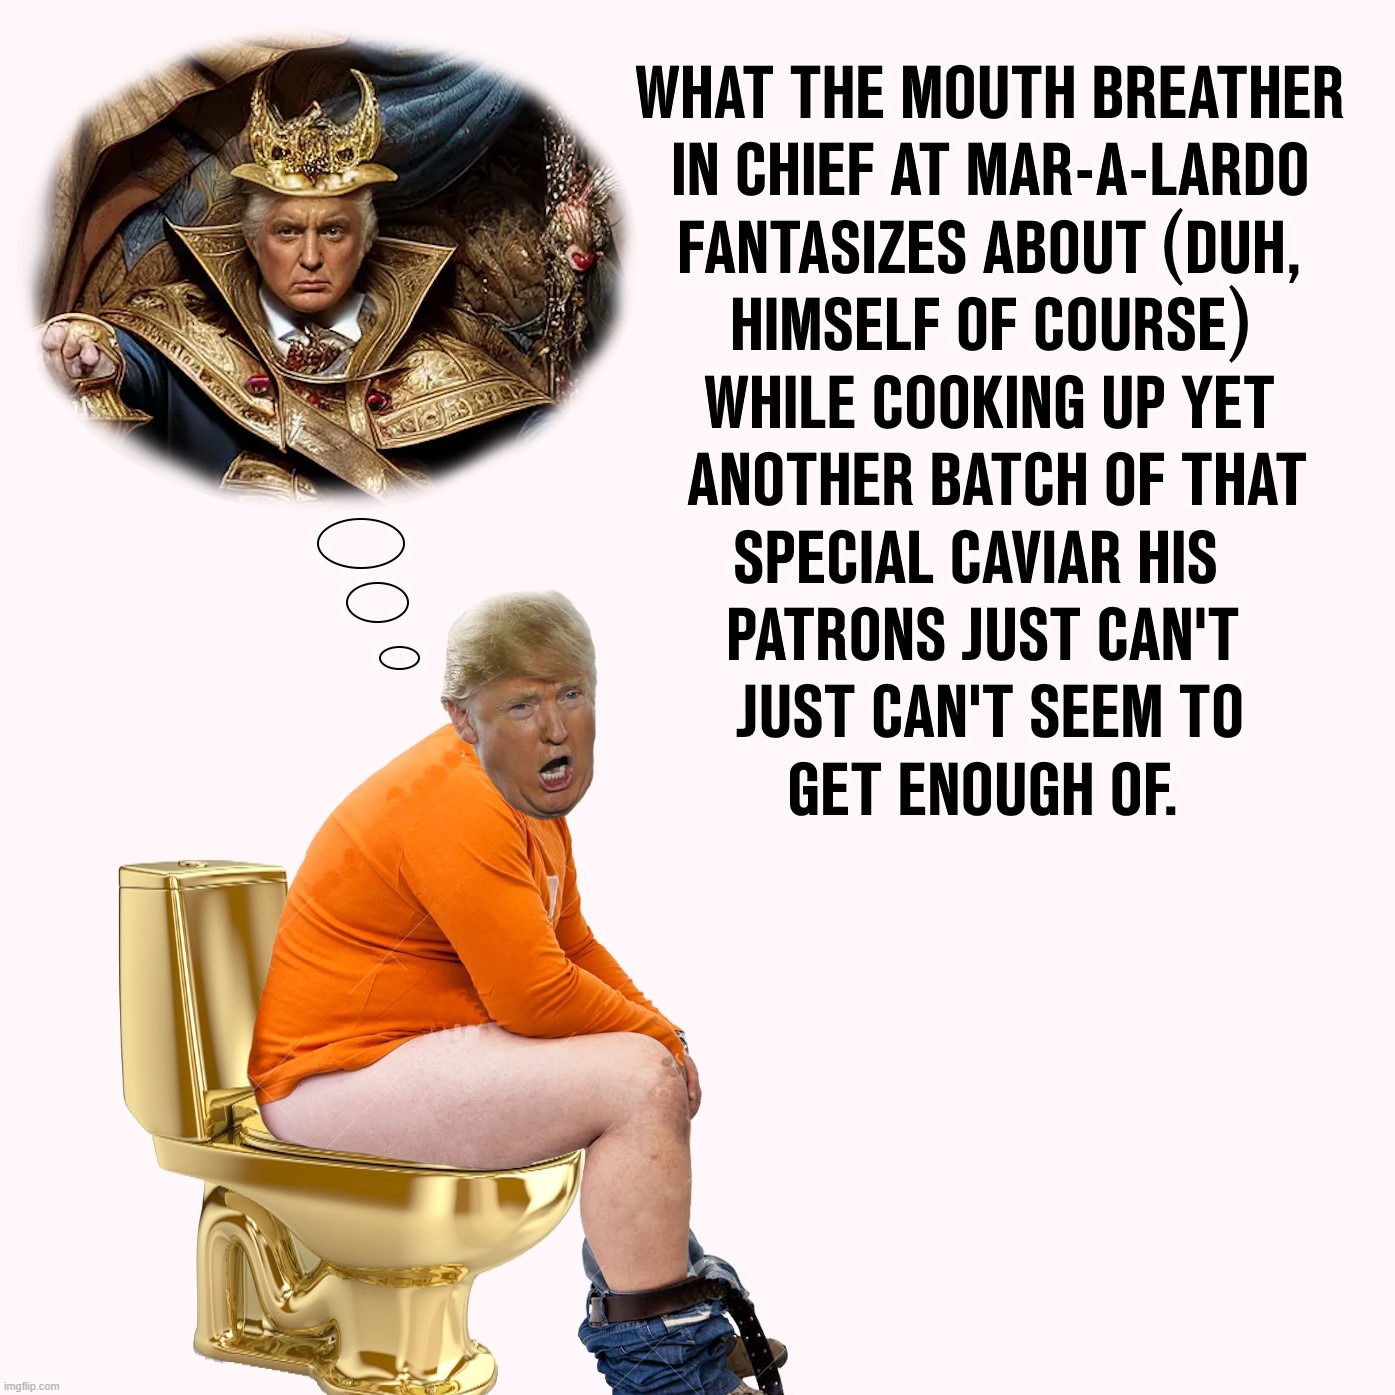 Why The Caviar Is So Popular Among Trump Supporters At Mar-A-Lardo. | image tagged in trump,donald trump,trump caviar,golden toilet,mar a lago,mar-a-lardo | made w/ Imgflip meme maker